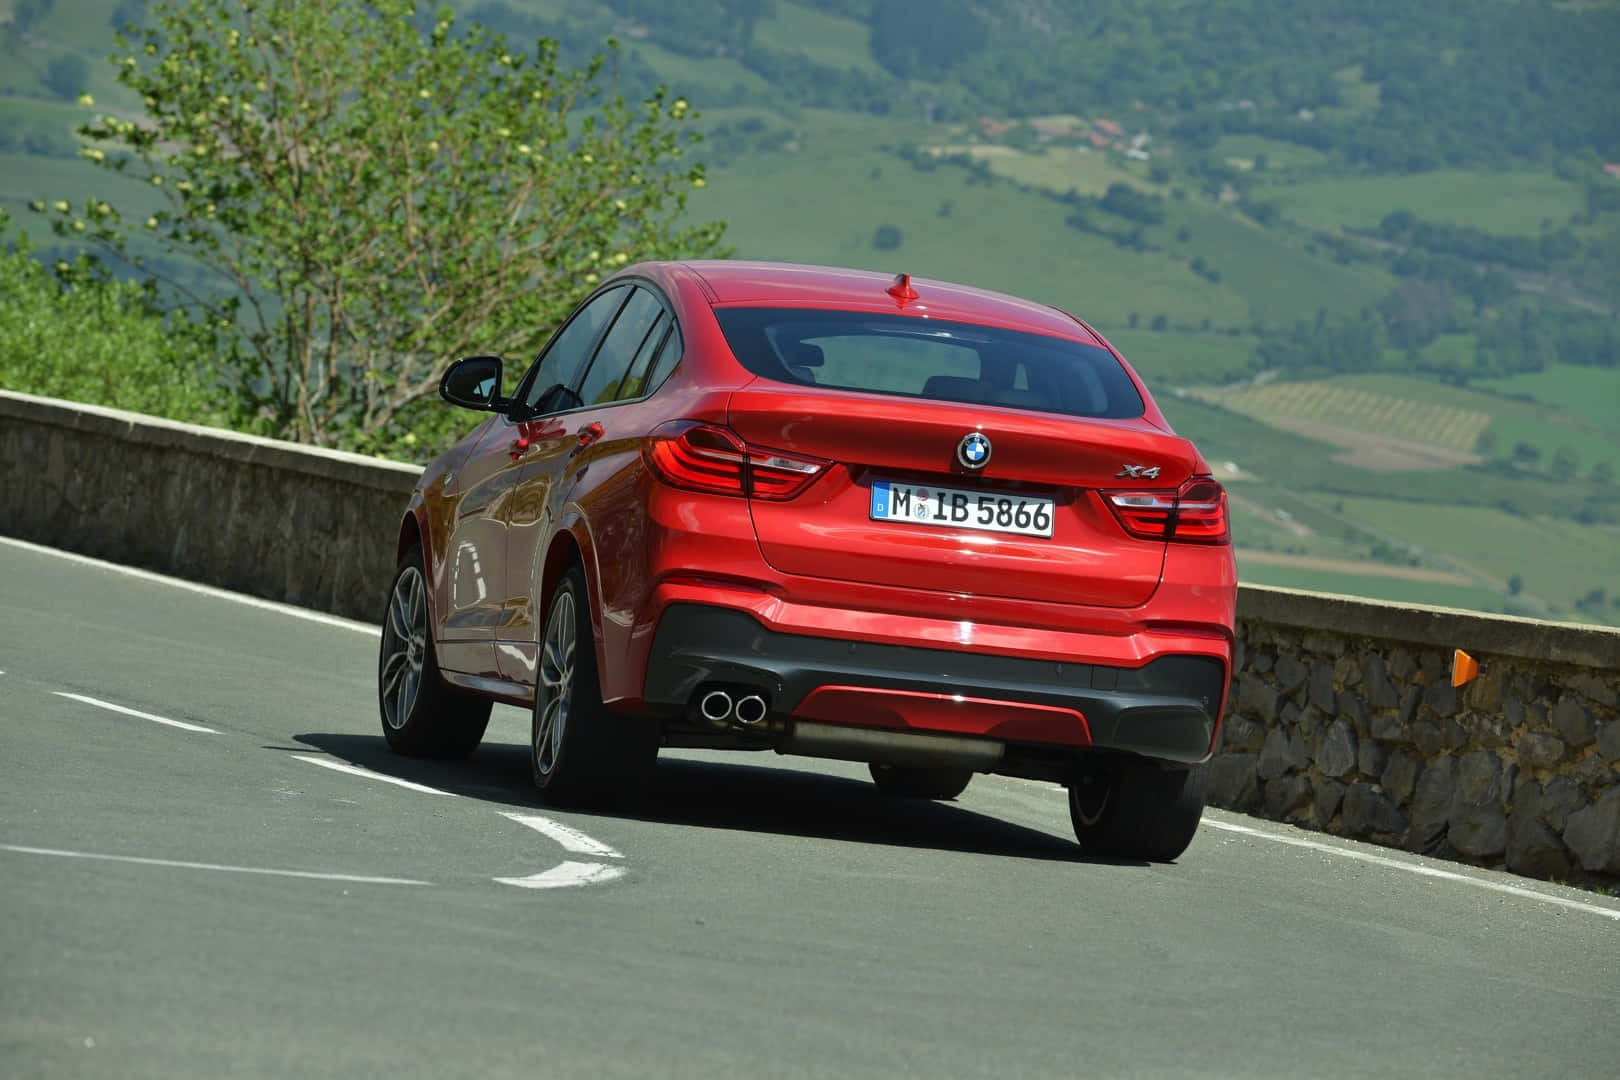 Powerful and Refined - The BMW X4 in its Elegant Stance Wallpaper